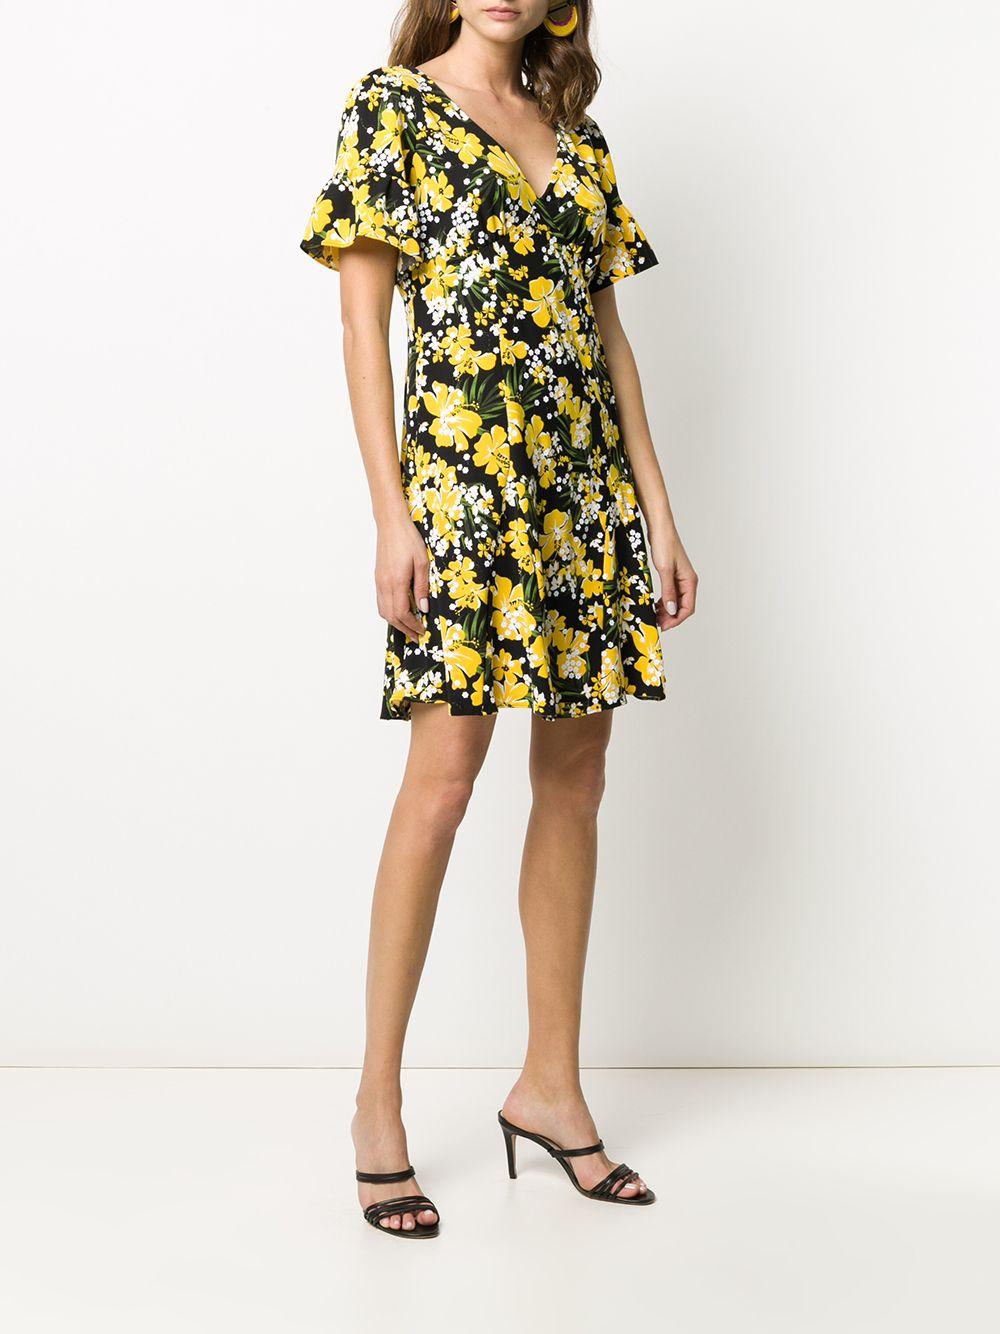 MICHAEL Michael Kors Synthetic Floral Printed Mini Dress in Yellow - Lyst